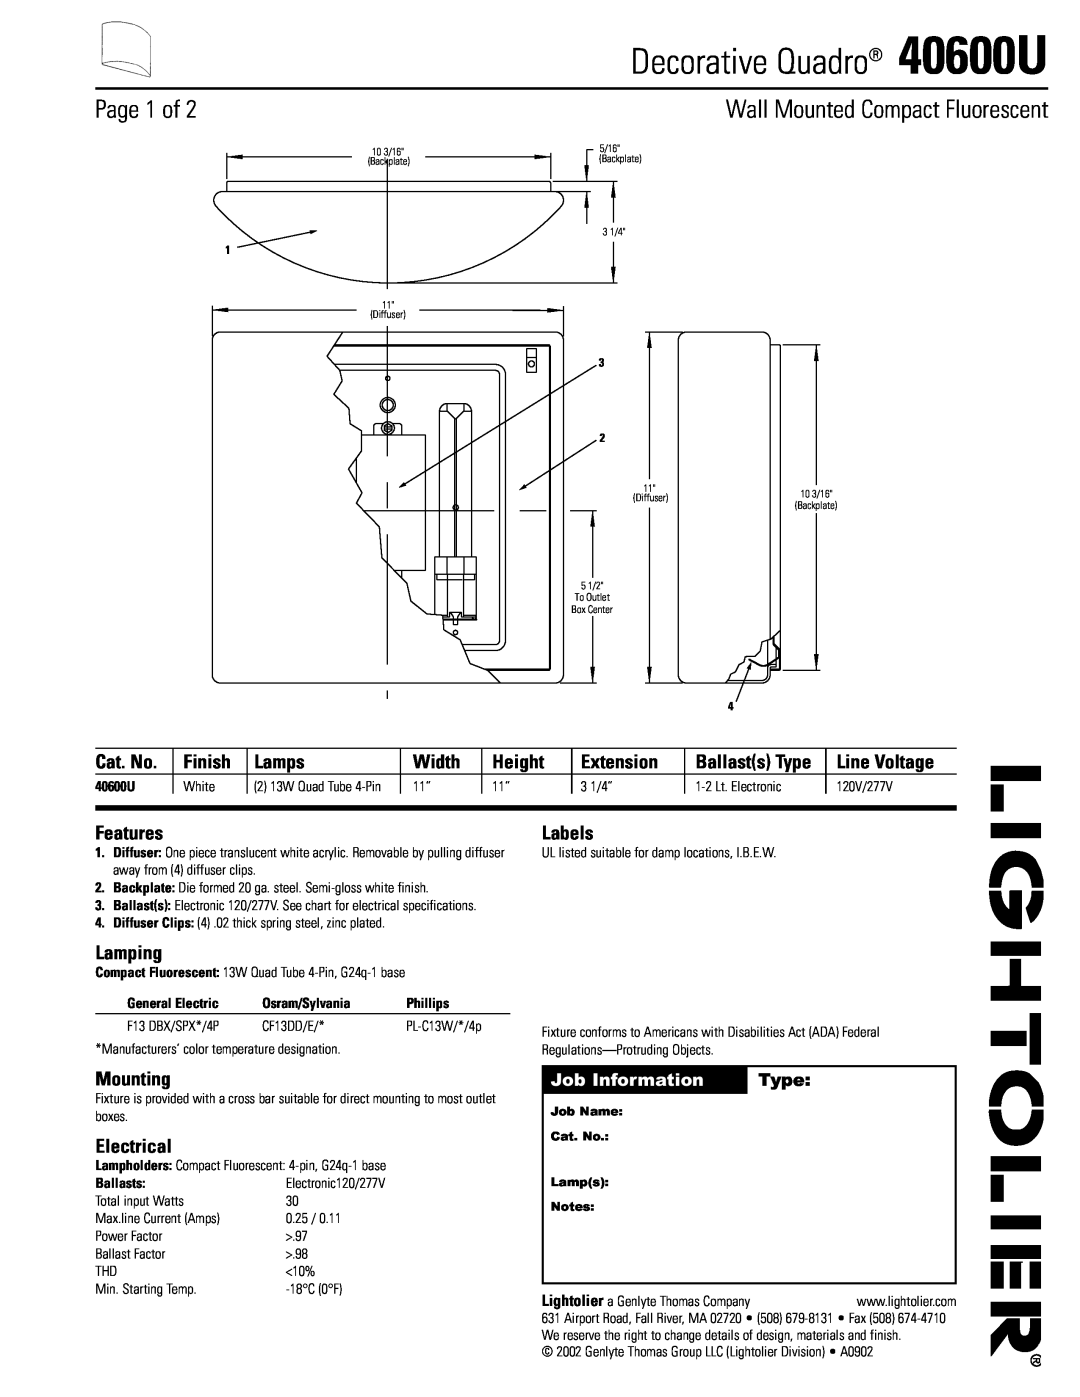 Lightolier specifications Decorative Quadro 40600U, Page 1 of, Wall Mounted Compact Fluorescent, Cat. No, Finish, Lamps 